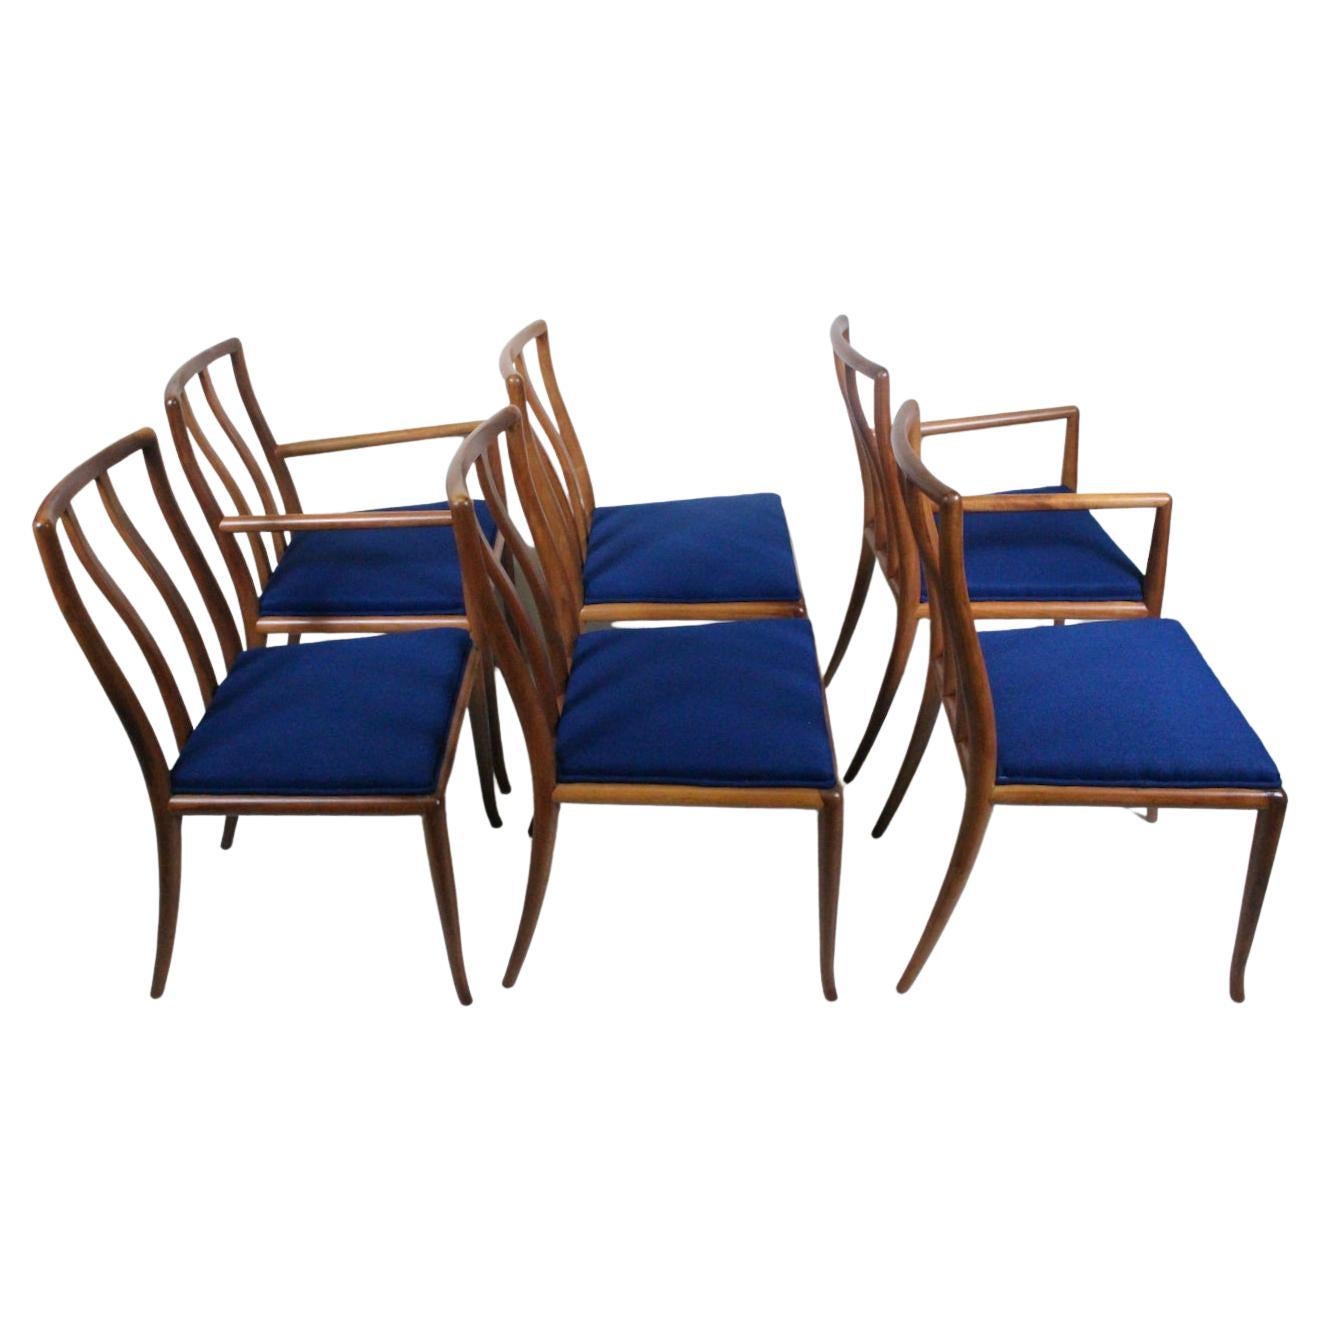 Set of 6 T. H. Robsjohn Gibbings for Widdicomb Sabre Walnut Dining Chairs, 1950s For Sale 13